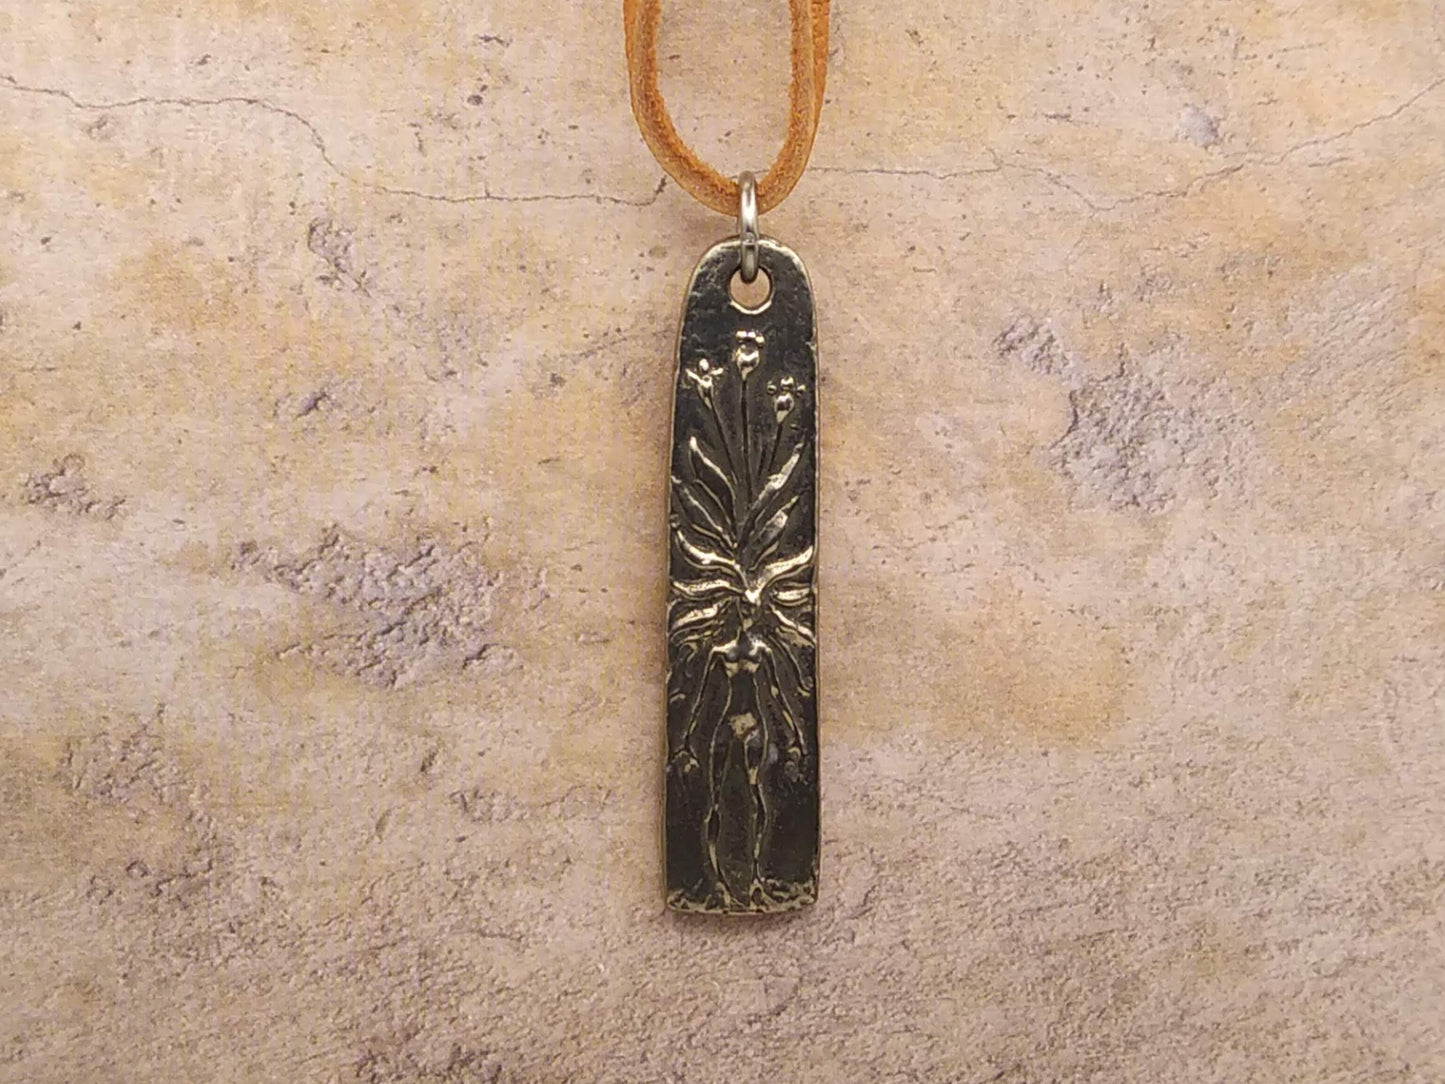 Dryad's Blessing necklace